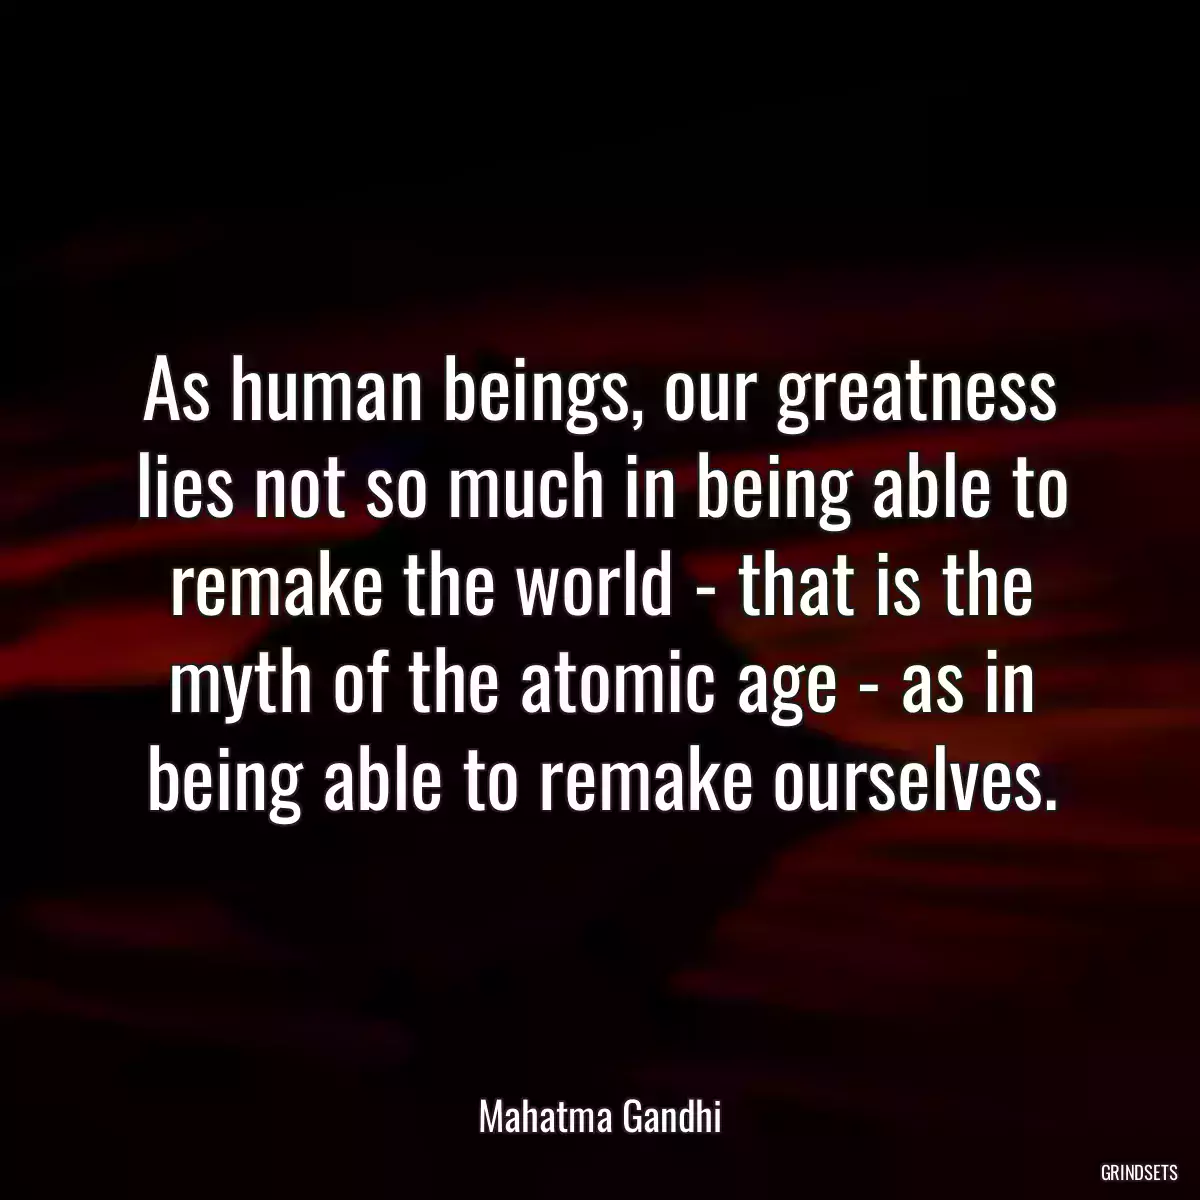 As human beings, our greatness lies not so much in being able to remake the world - that is the myth of the atomic age - as in being able to remake ourselves.